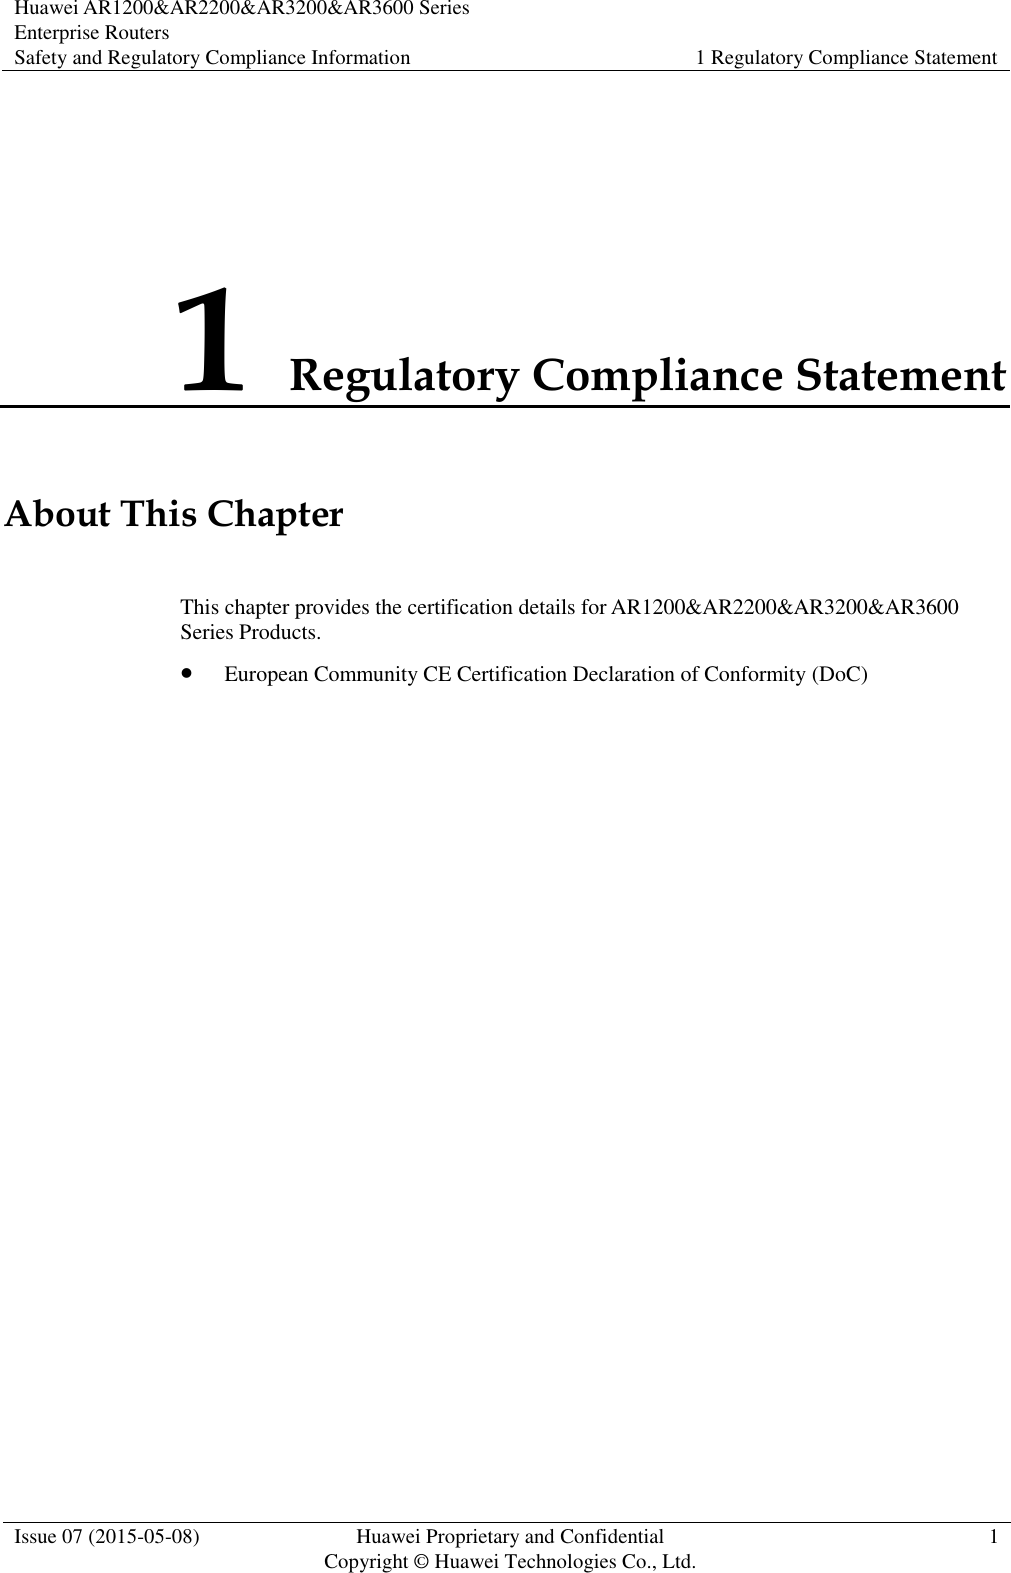 Huawei AR1200&amp;AR2200&amp;AR3200&amp;AR3600 Series Enterprise Routers Safety and Regulatory Compliance Information 1 Regulatory Compliance Statement  Issue 07 (2015-05-08) Huawei Proprietary and Confidential           Copyright © Huawei Technologies Co., Ltd. 1  1 Regulatory Compliance Statement About This Chapter This chapter provides the certification details for AR1200&amp;AR2200&amp;AR3200&amp;AR3600 Series Products.  European Community CE Certification Declaration of Conformity (DoC) 